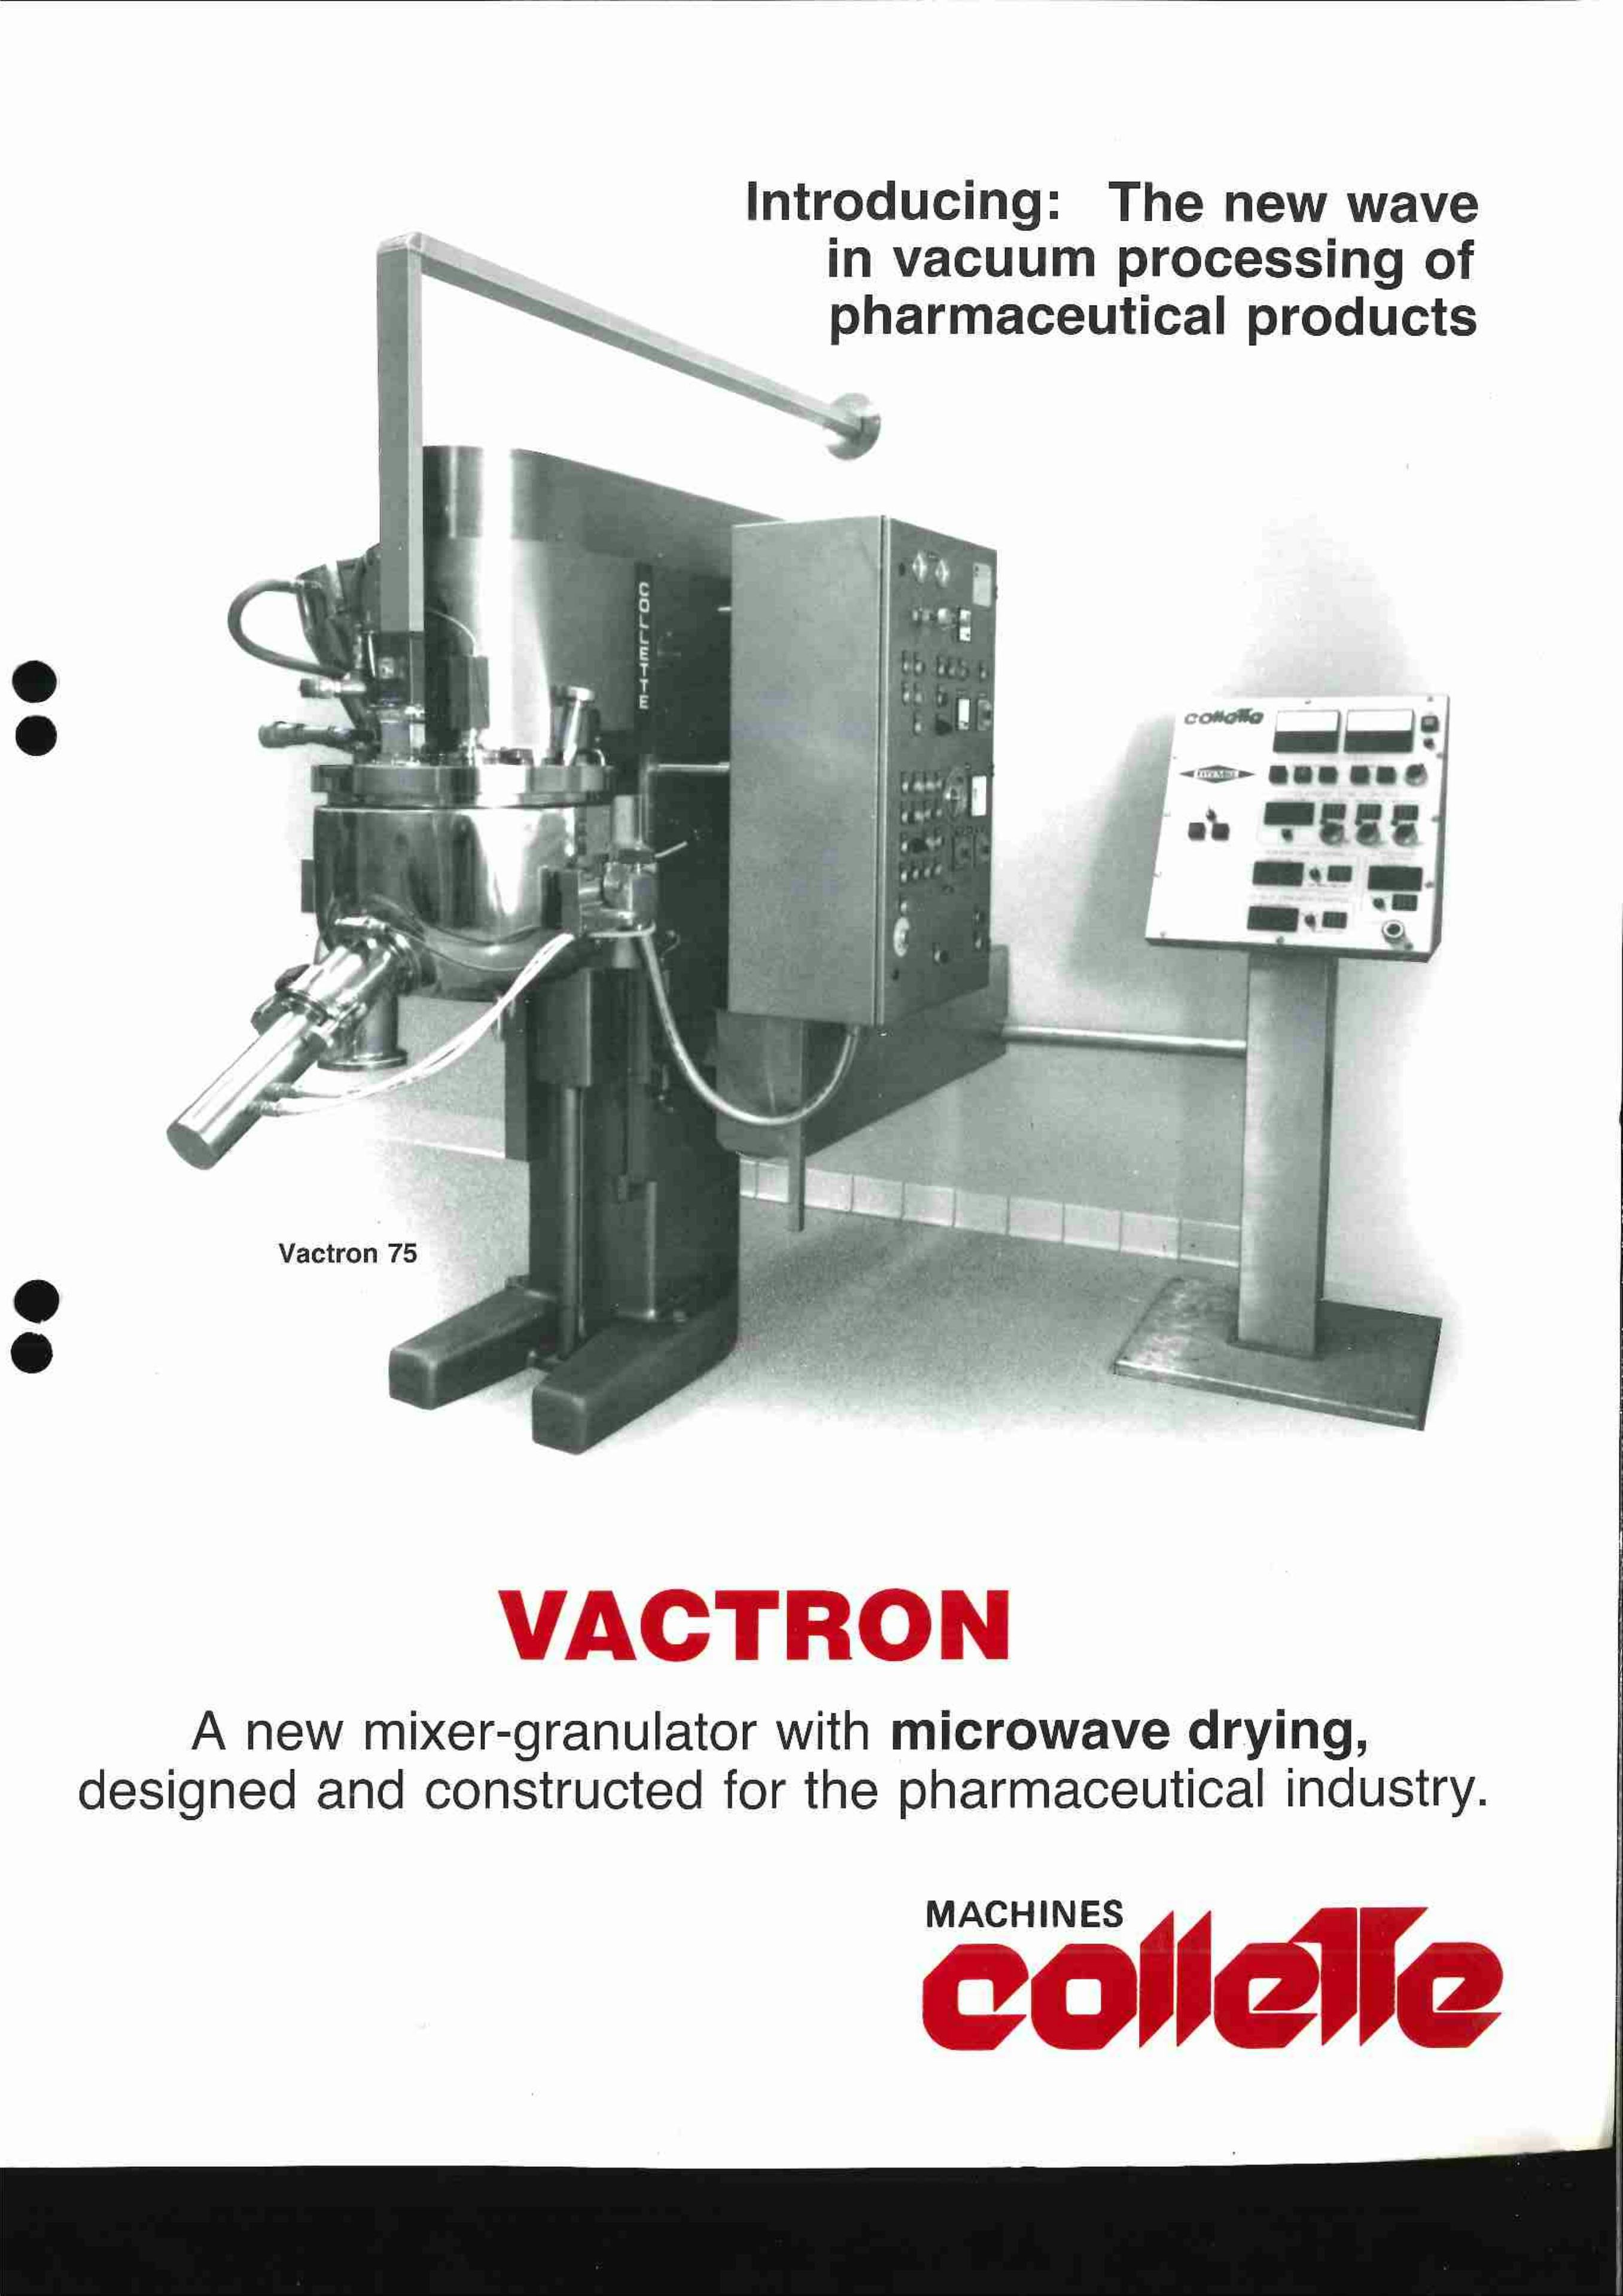 Collette GRAL 75 Vactron Microwave Drying and Solvent Recovery - Mezcladora universal - image 22